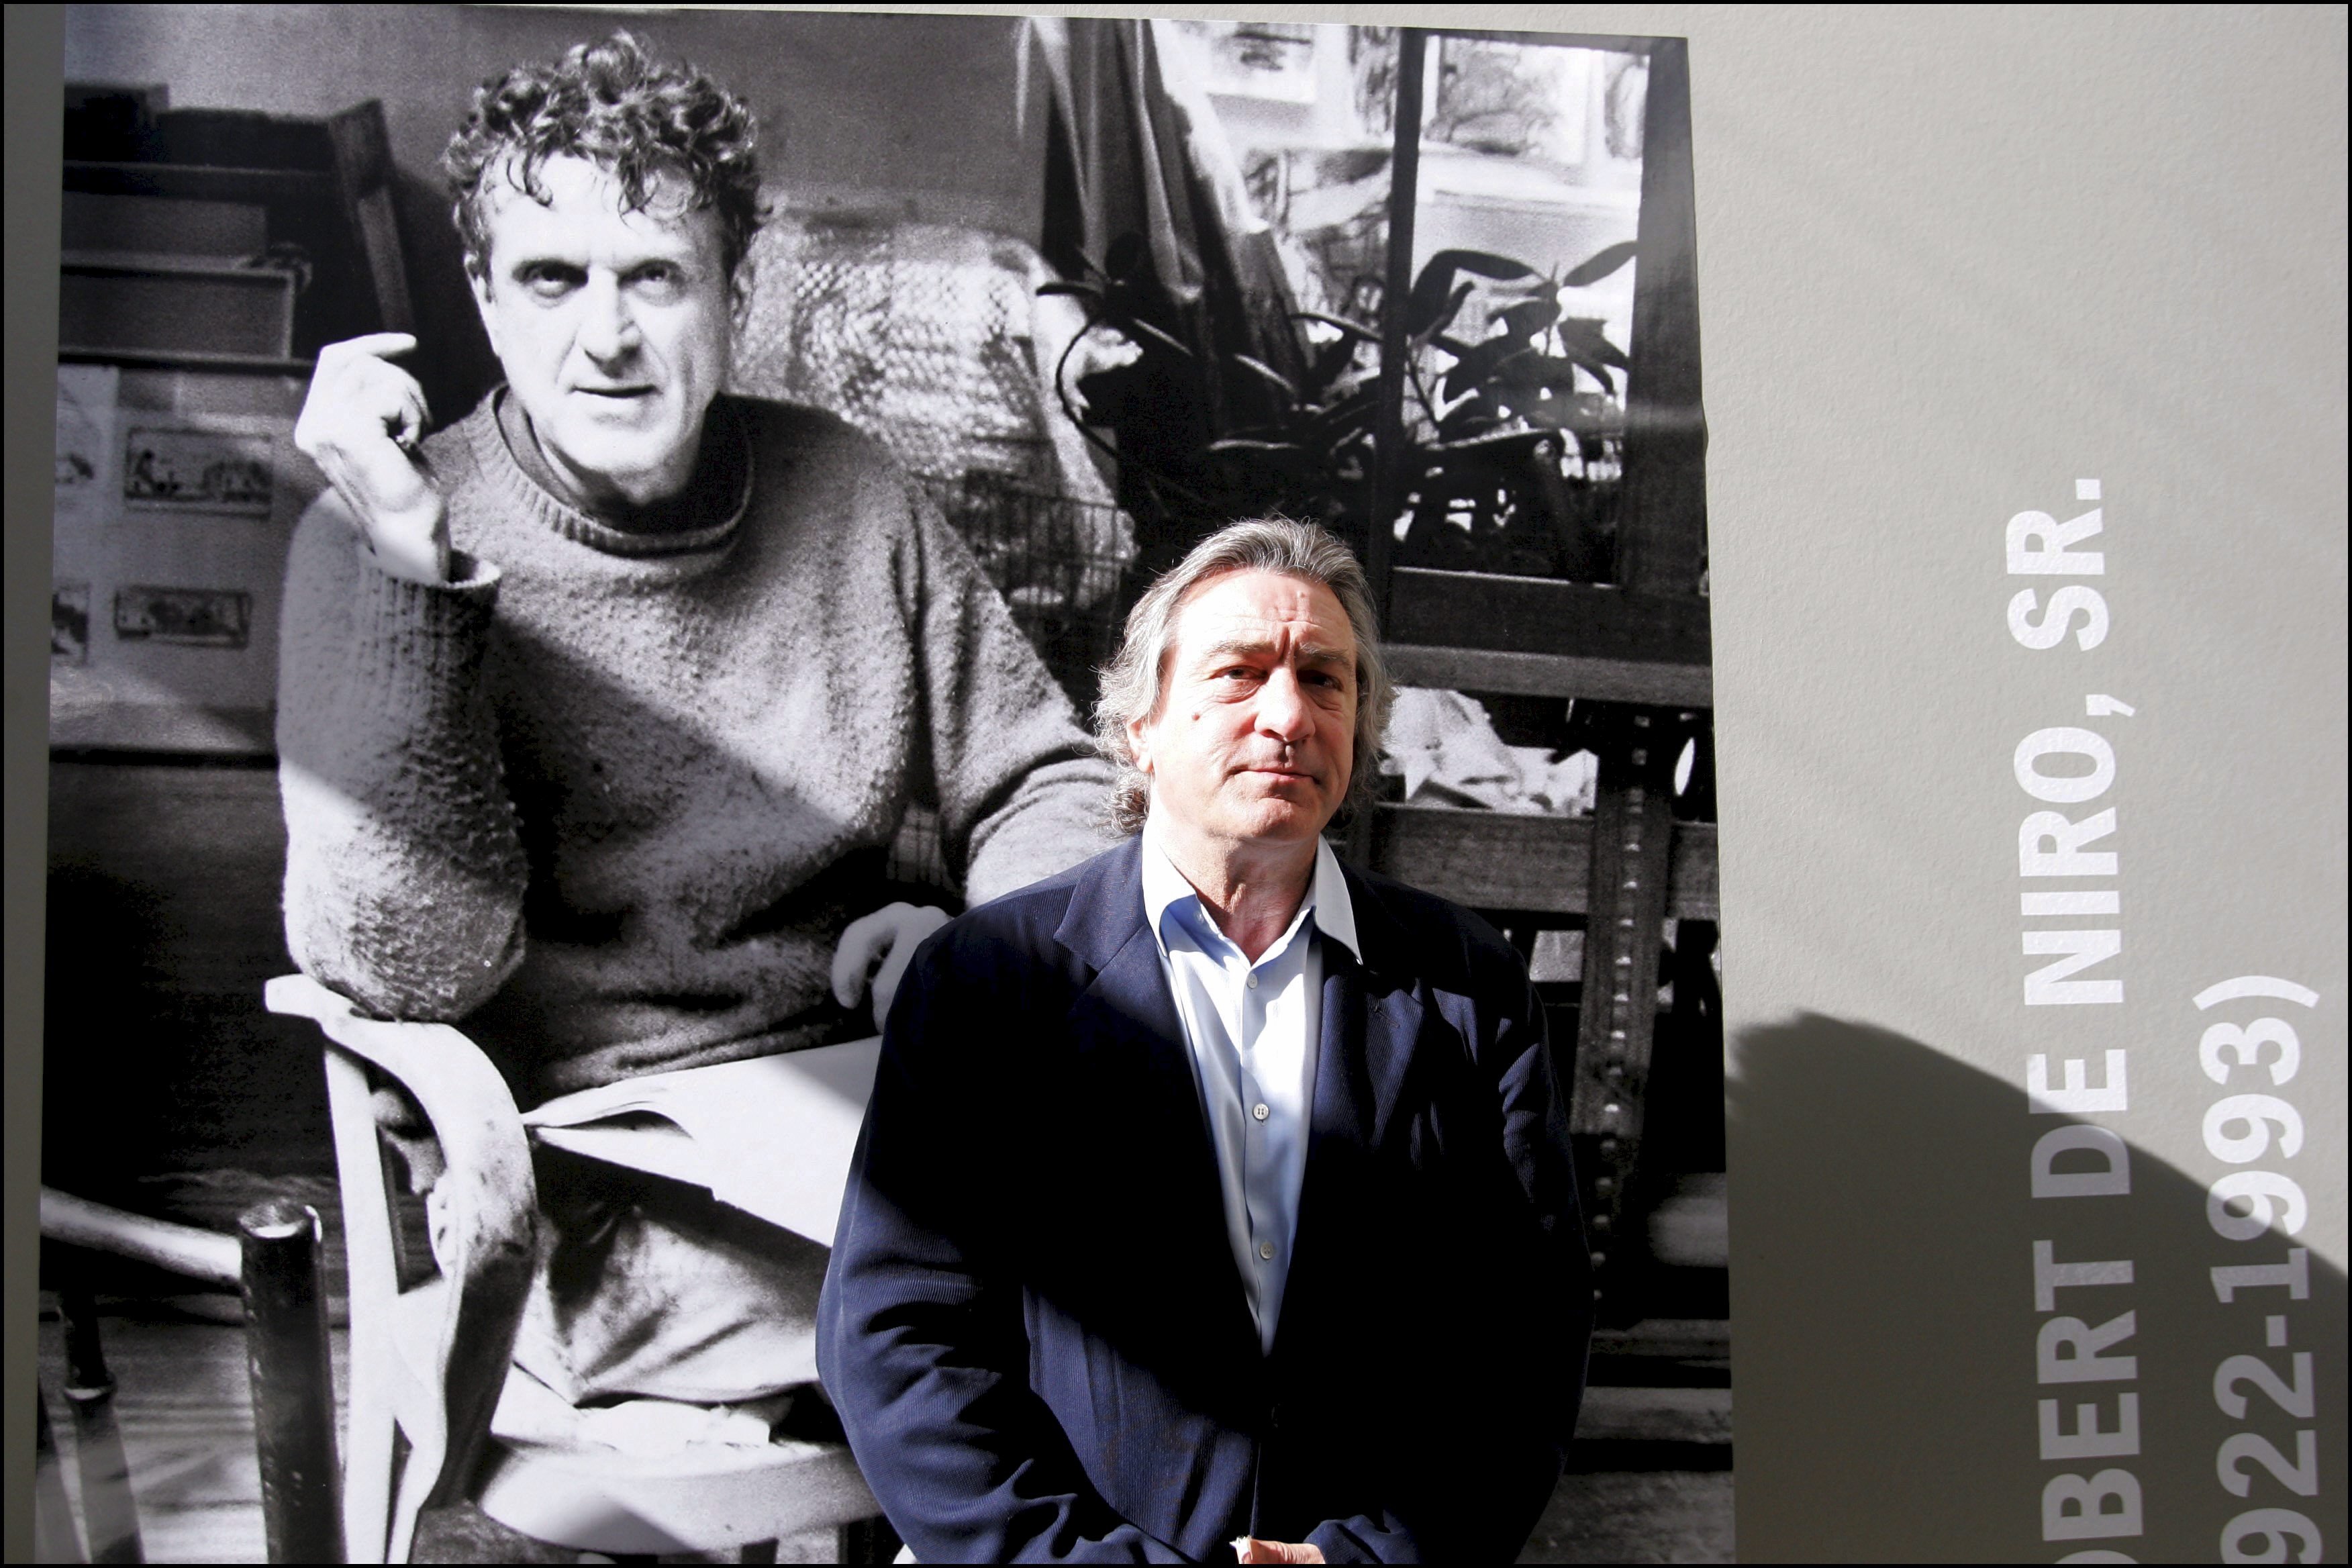 Robert De Niro poses next to a portrait of his father Robert Sr in an exhibition of Robert De Niro Sr - paintings at La Piscine in Roubaix, France on June 18th, 2005 | Source: Getty Images